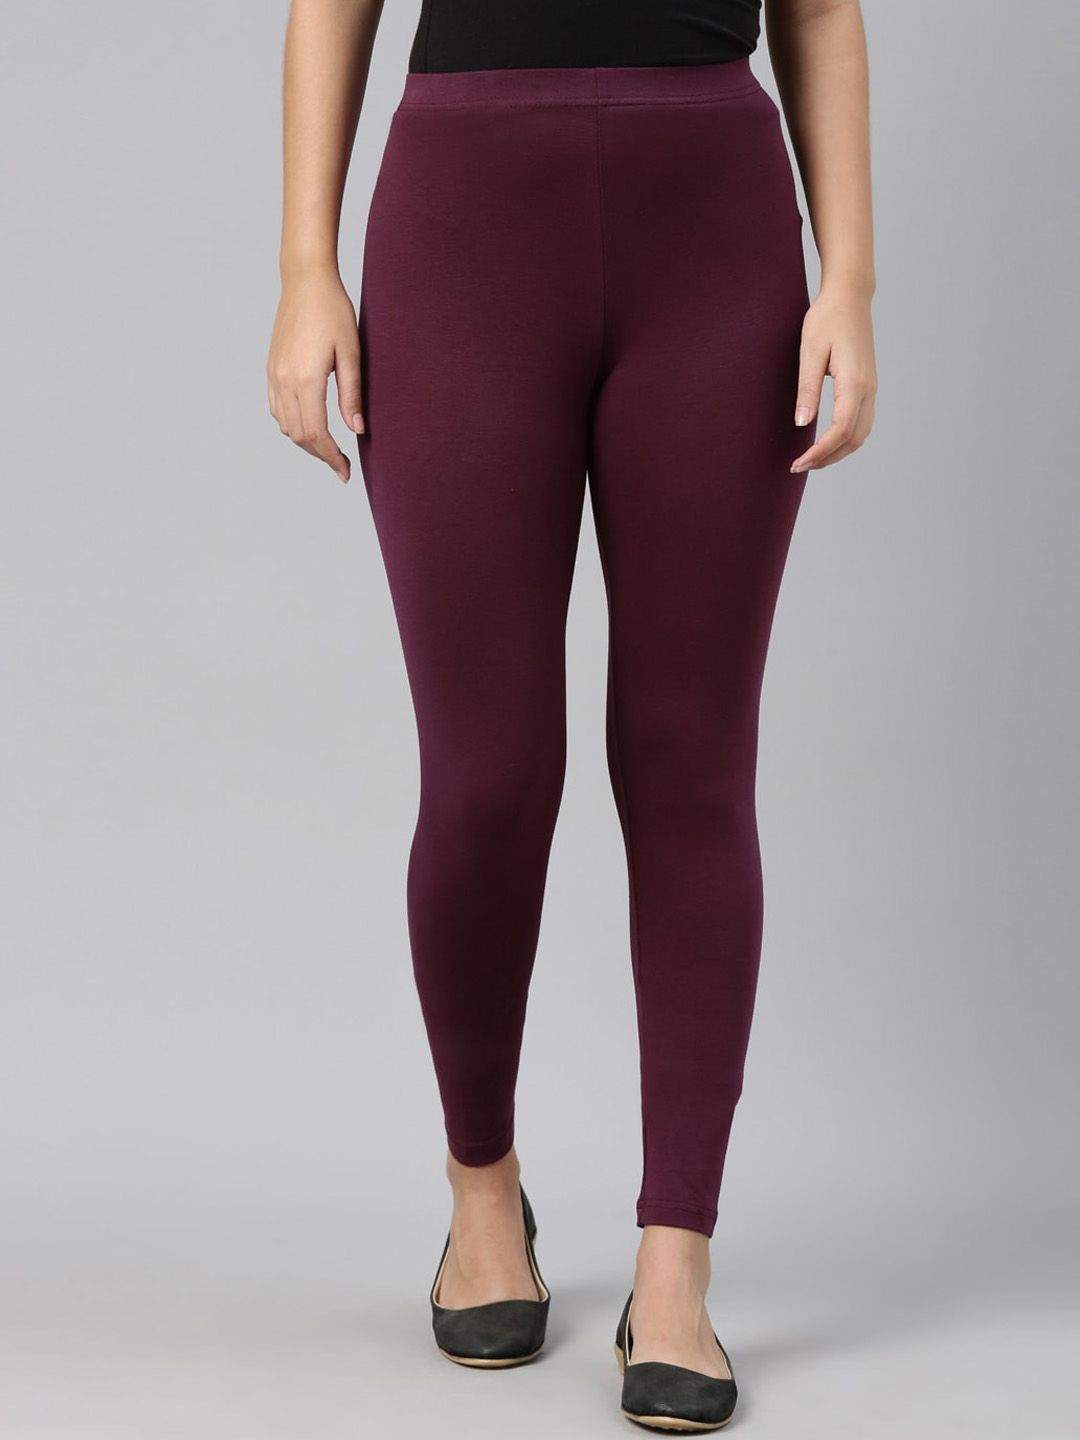 Go Colors Women Burgundy Solid Ankle Length Leggings Price in India